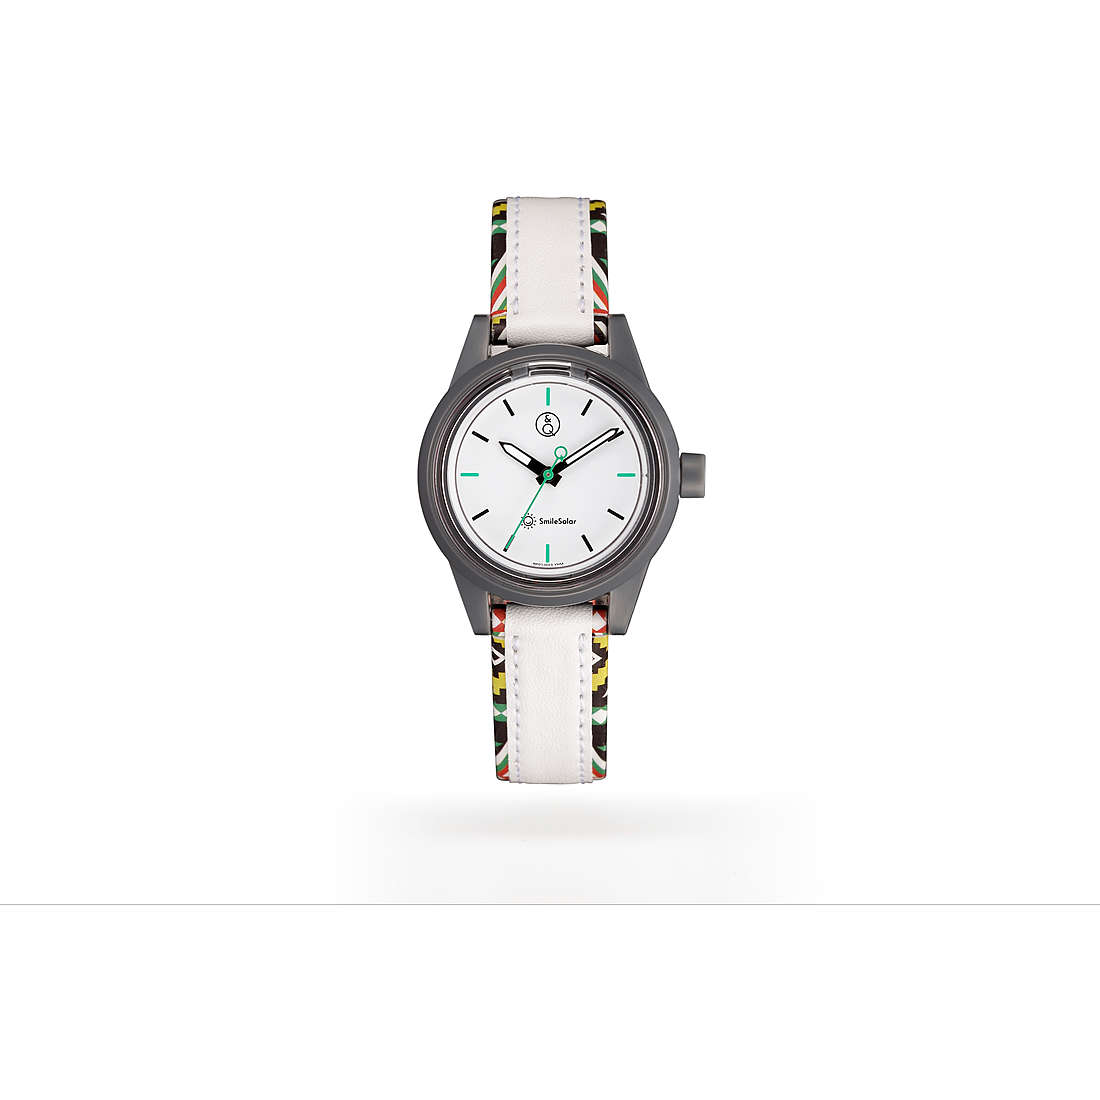 Smile Solar Native Dress Women's Time-Only Watch